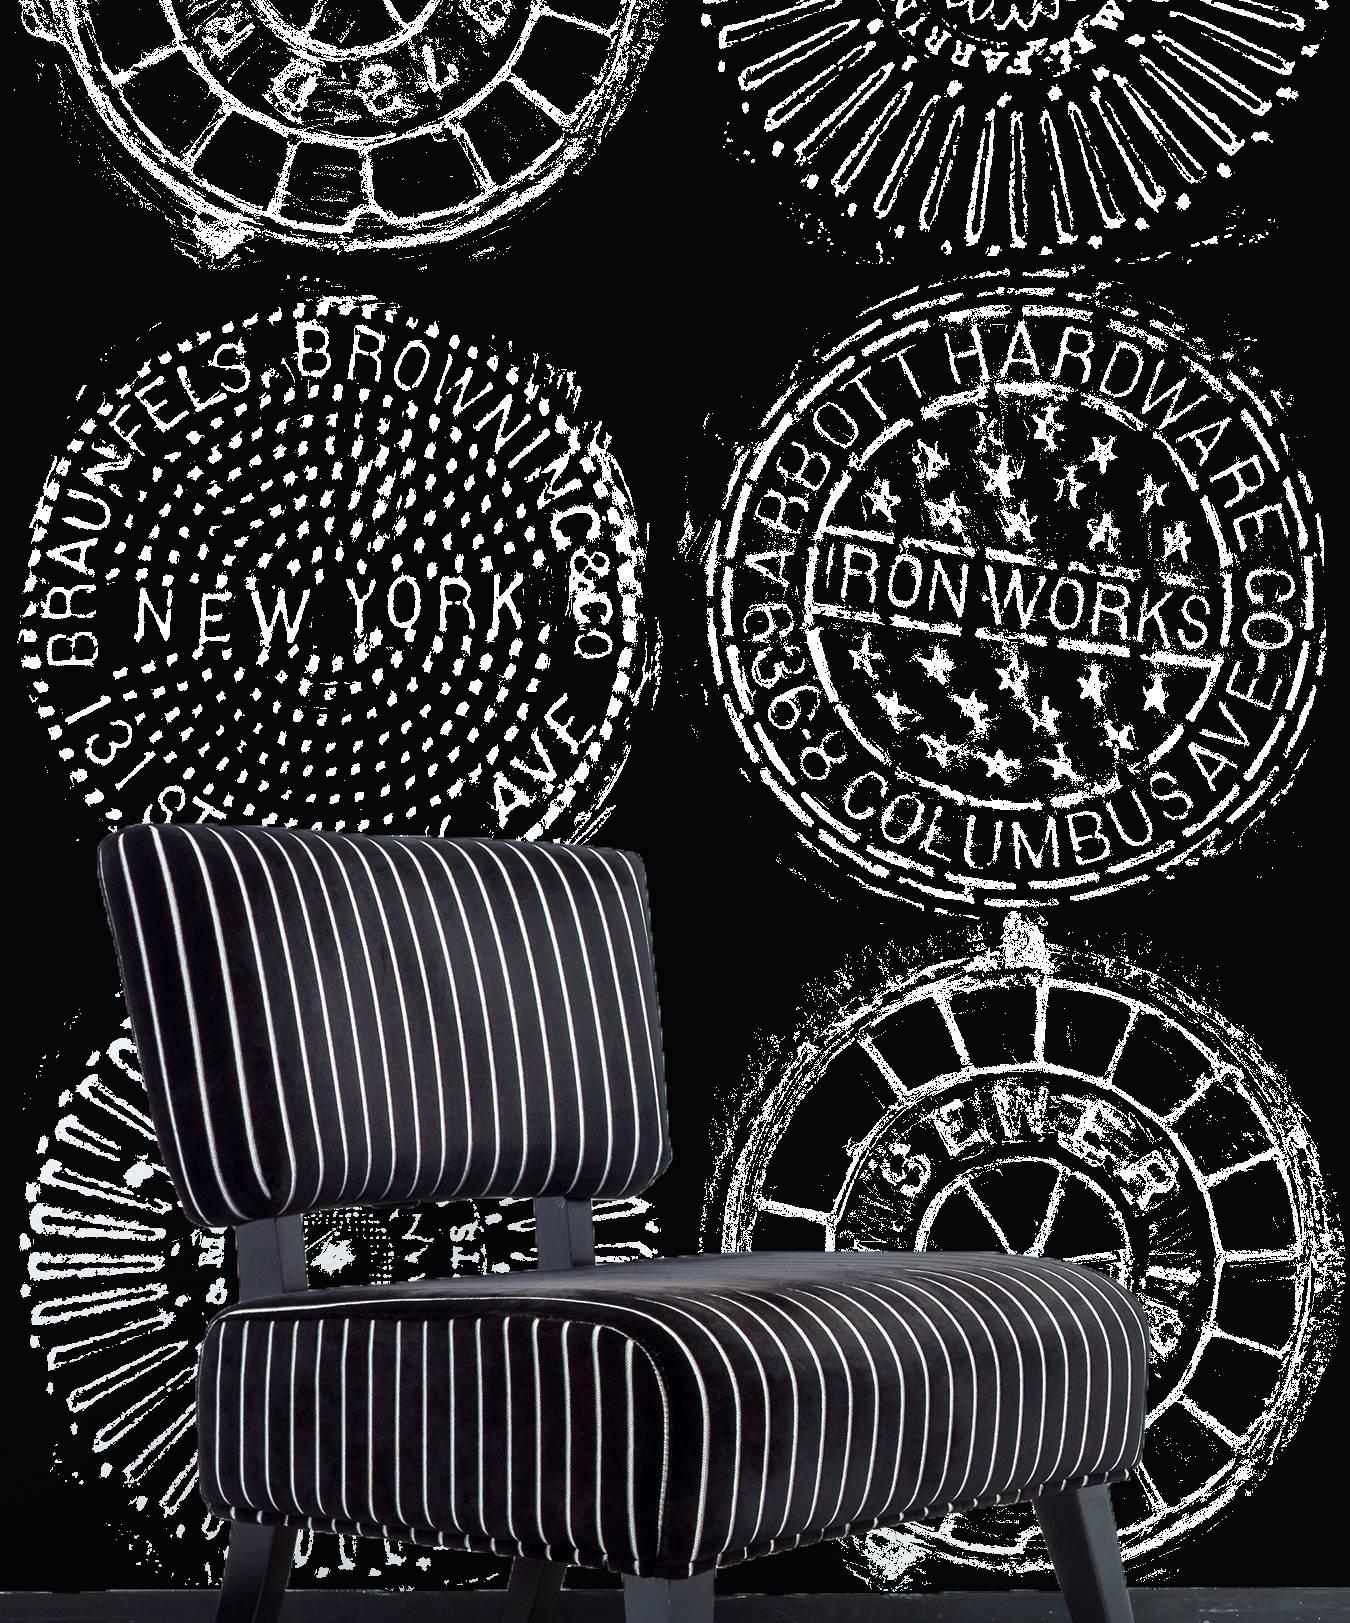 NYC Manhole Printed Wallpaper, Black on White Manhole Cover For Sale 2